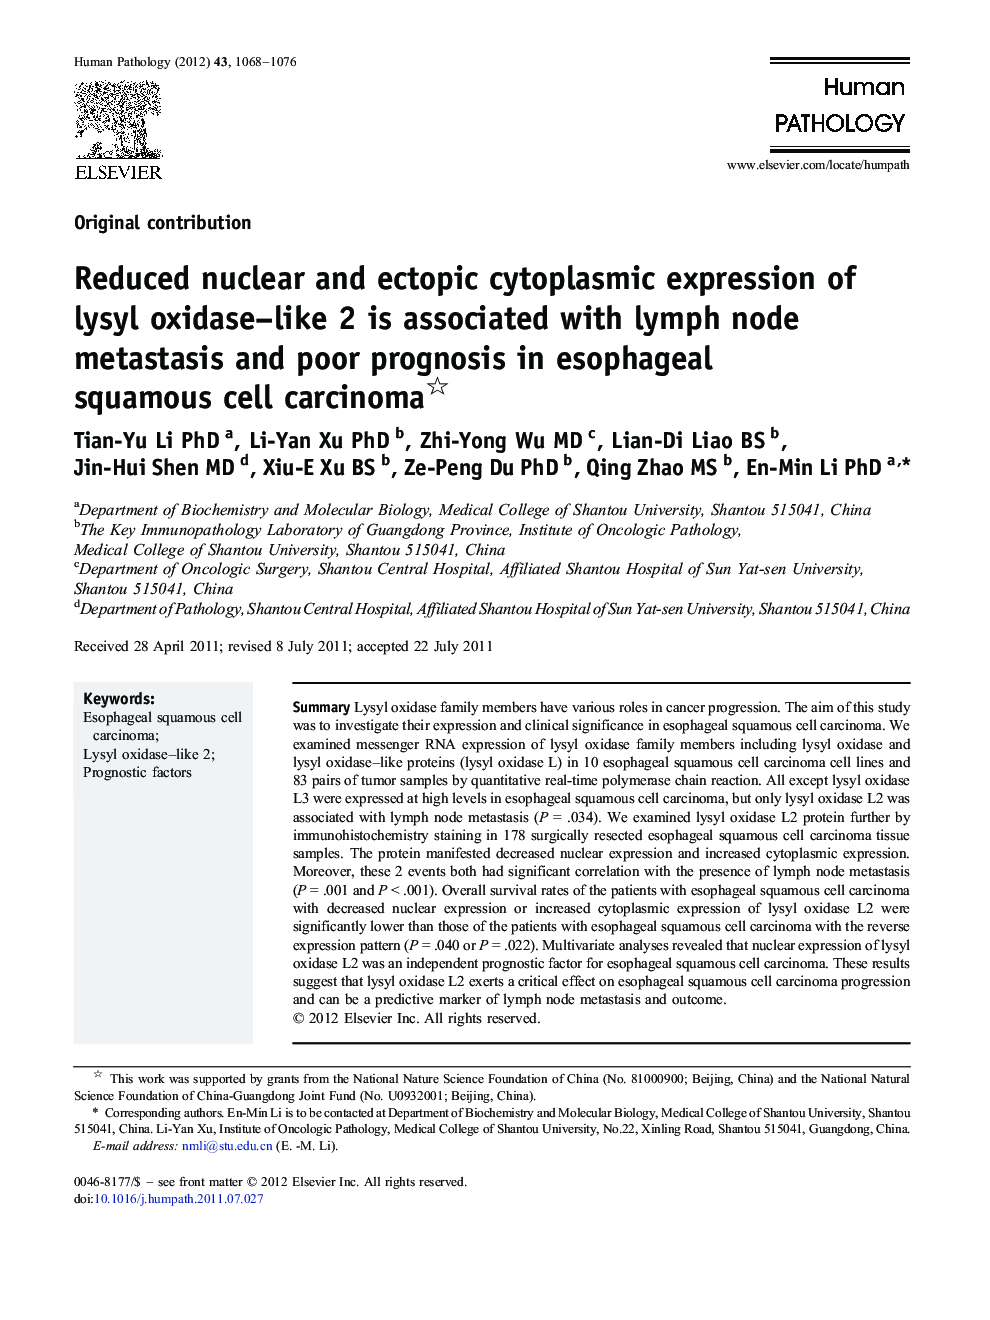 Reduced nuclear and ectopic cytoplasmic expression of lysyl oxidase–like 2 is associated with lymph node metastasis and poor prognosis in esophageal squamous cell carcinoma 